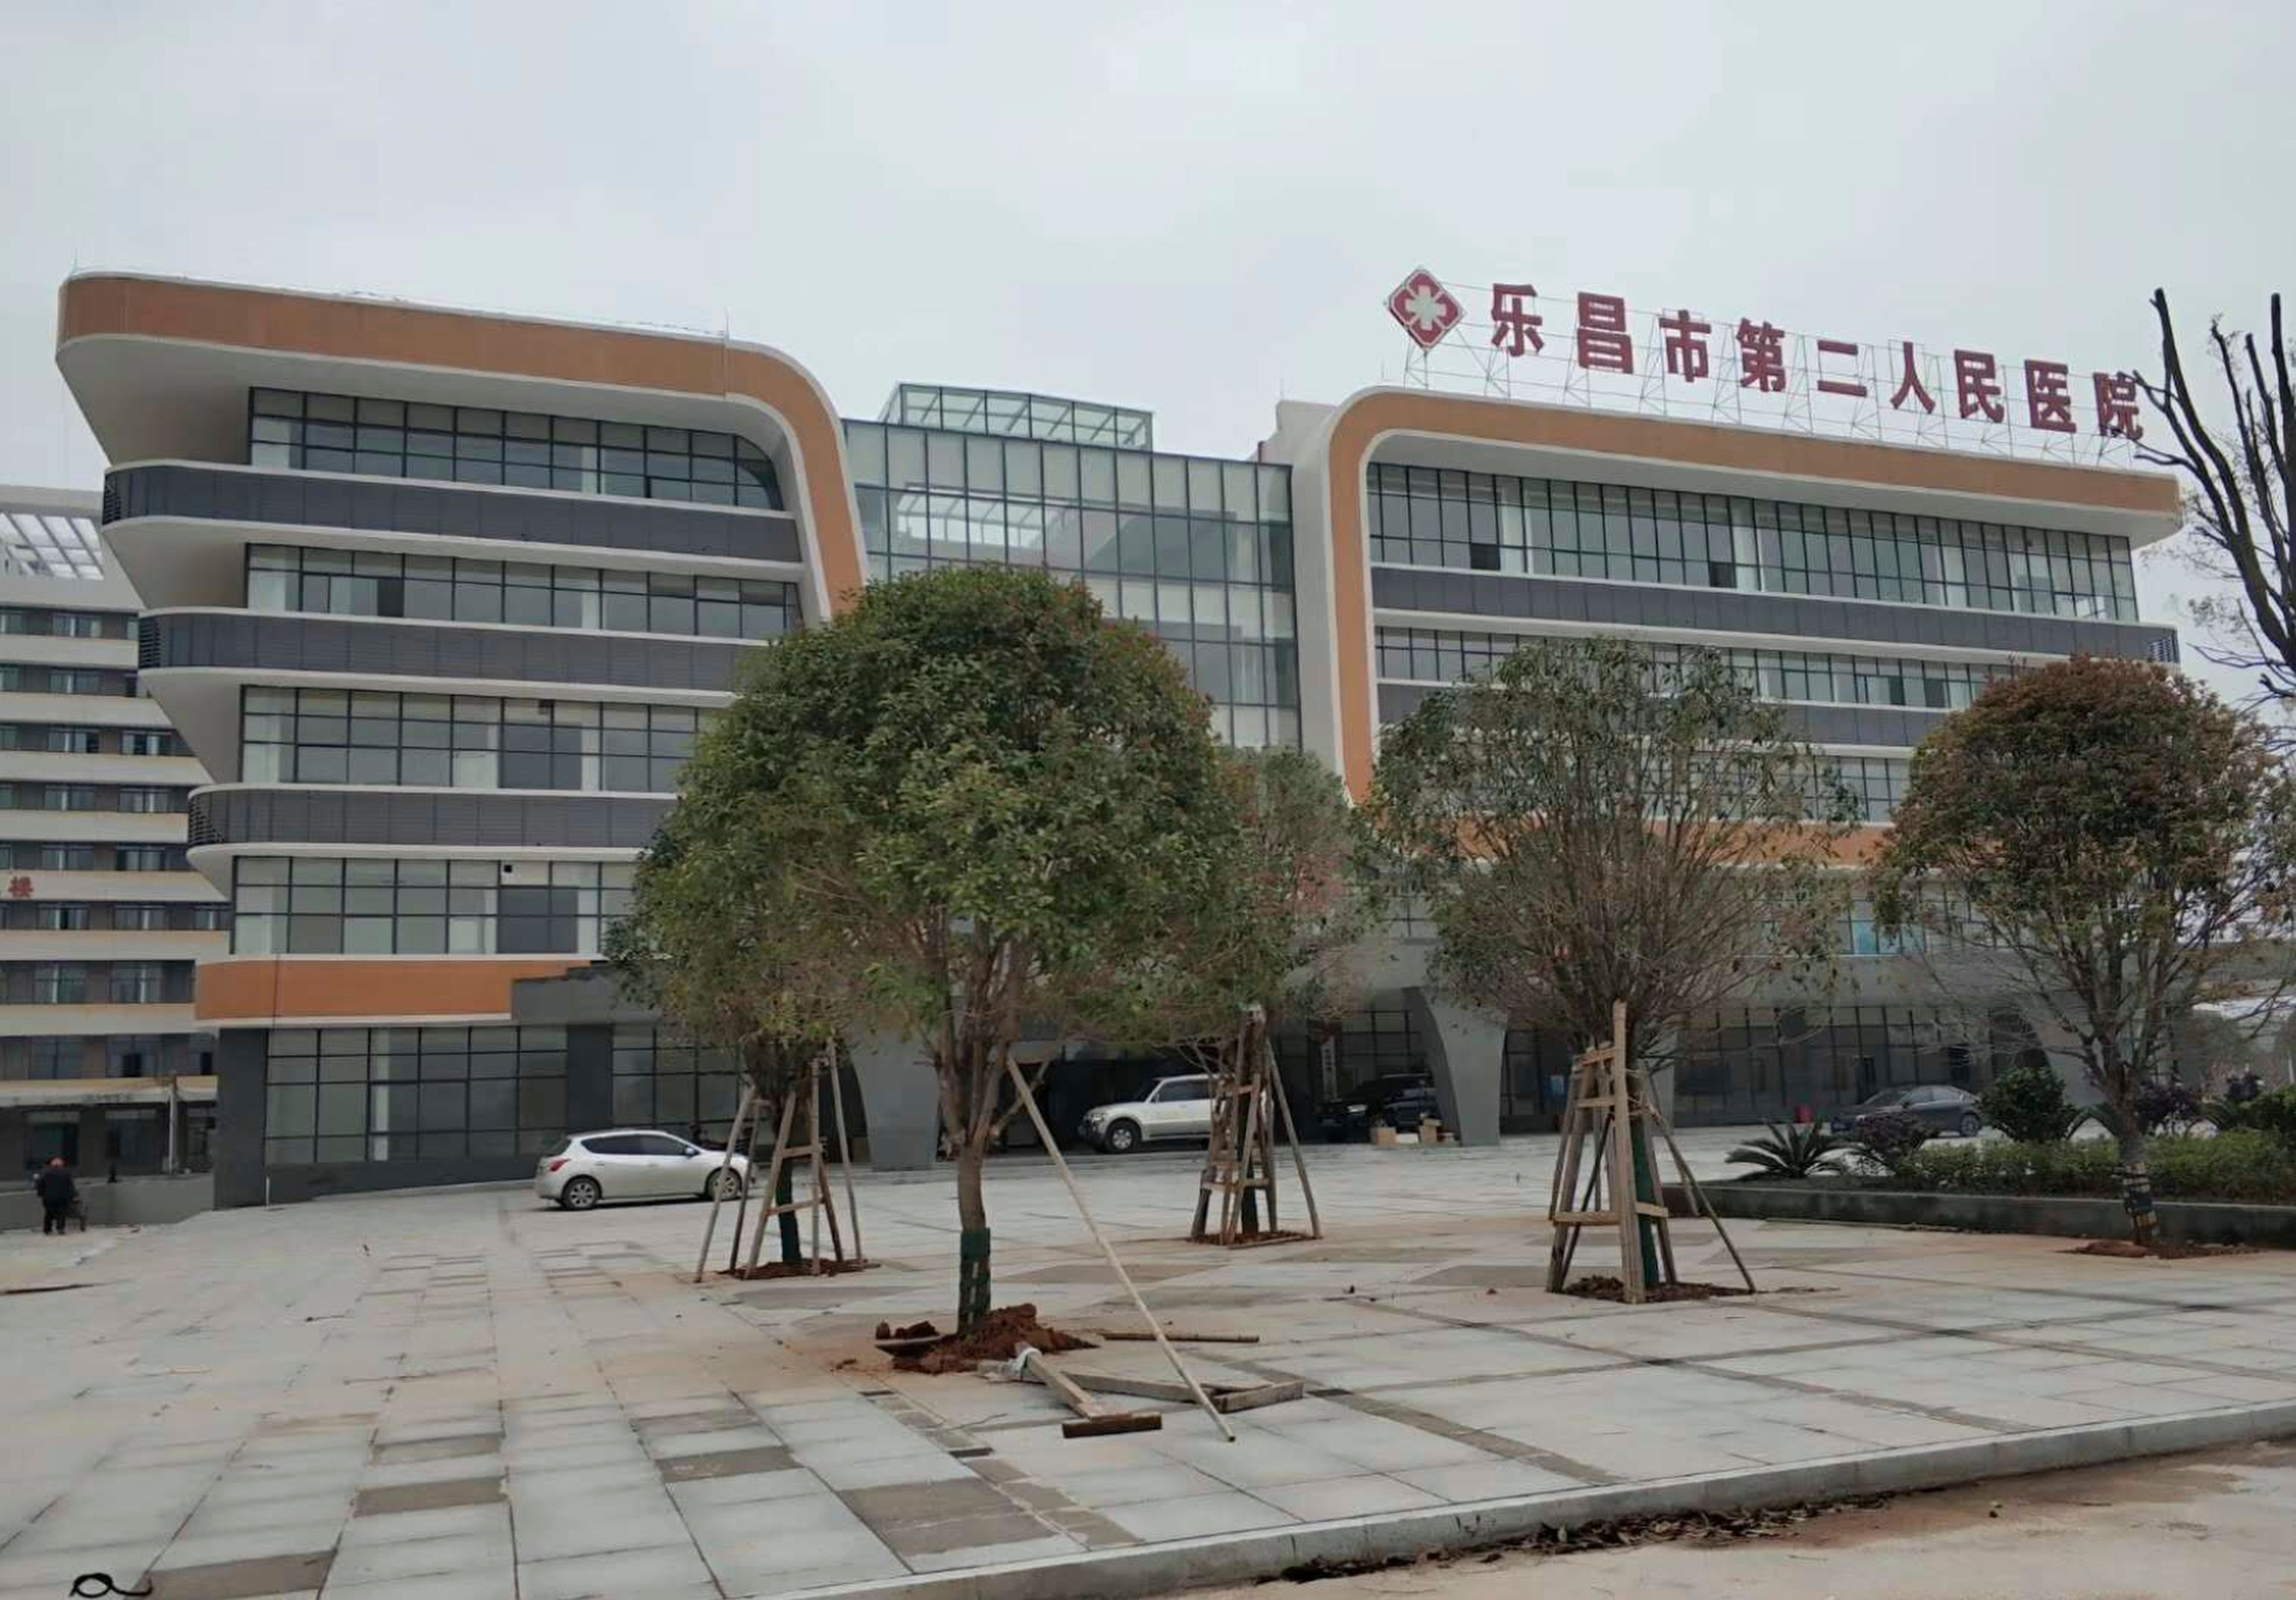 Lechang Second People’s Hospital in Shaoguan. The Hong Kong woman was taken here for treatment on Christmas Day, but later died. Photo: Sohu